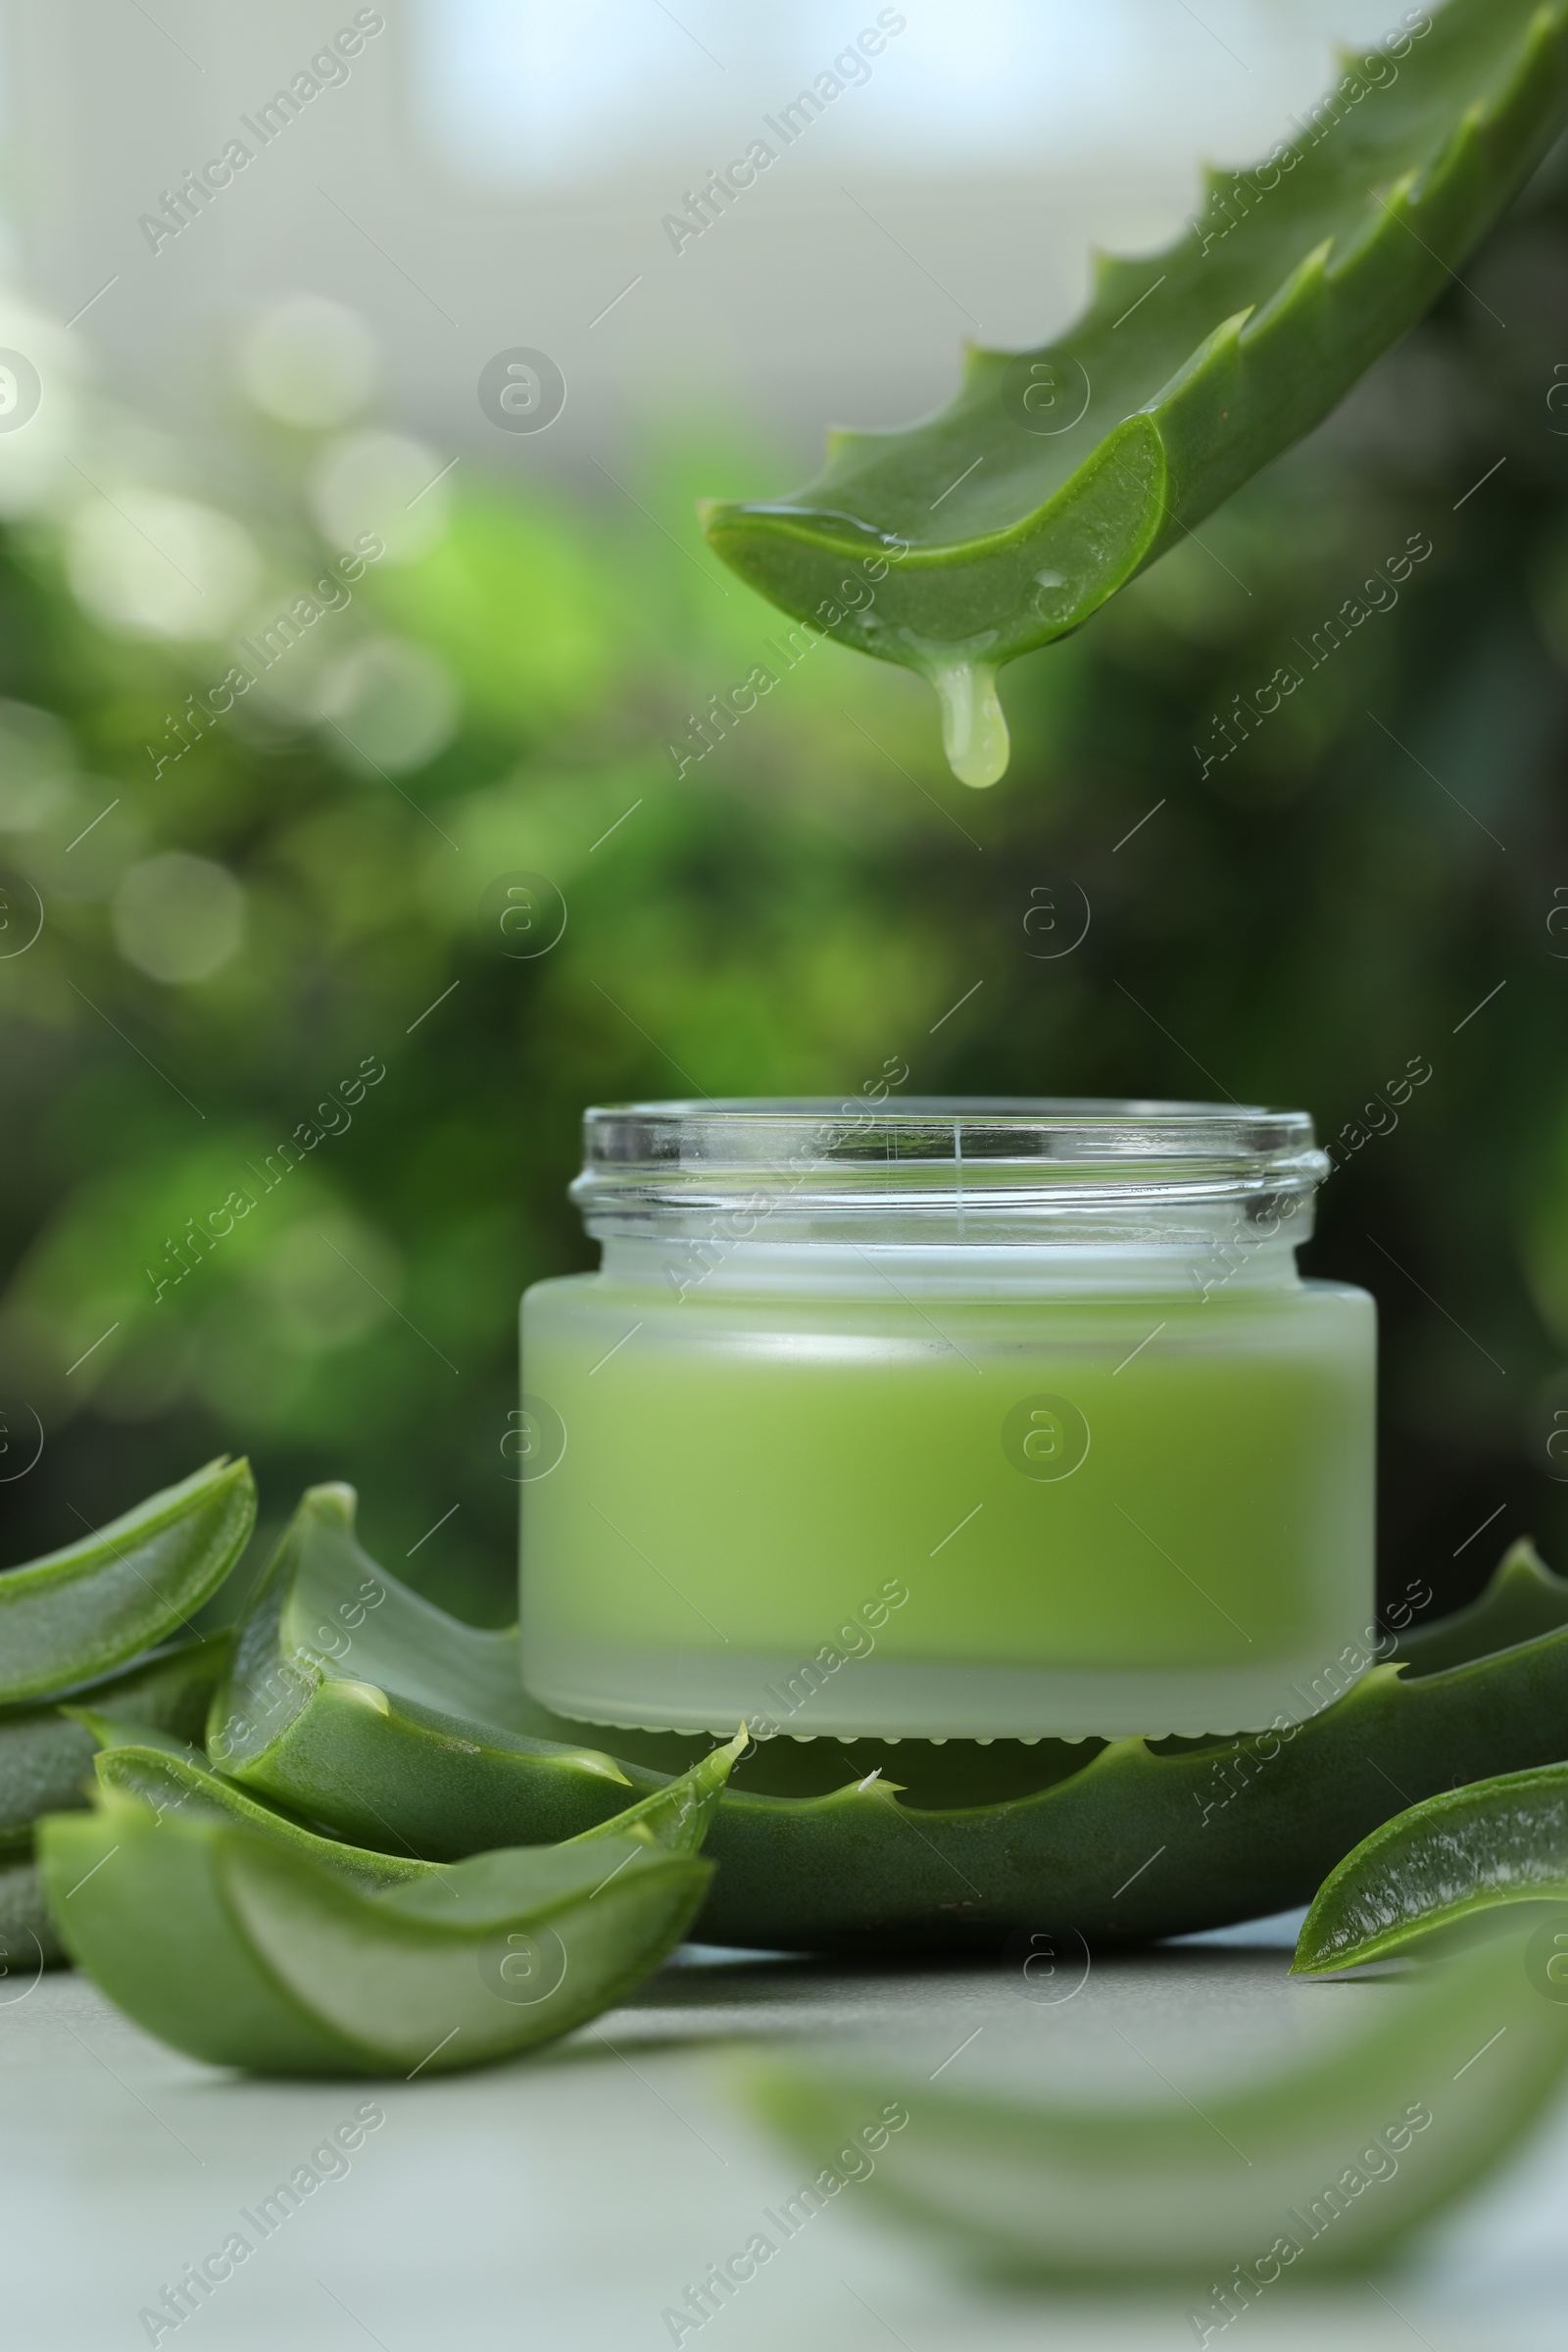 Photo of Aloe vera juice dripping from leaf into jar with cream on white table against blurred background